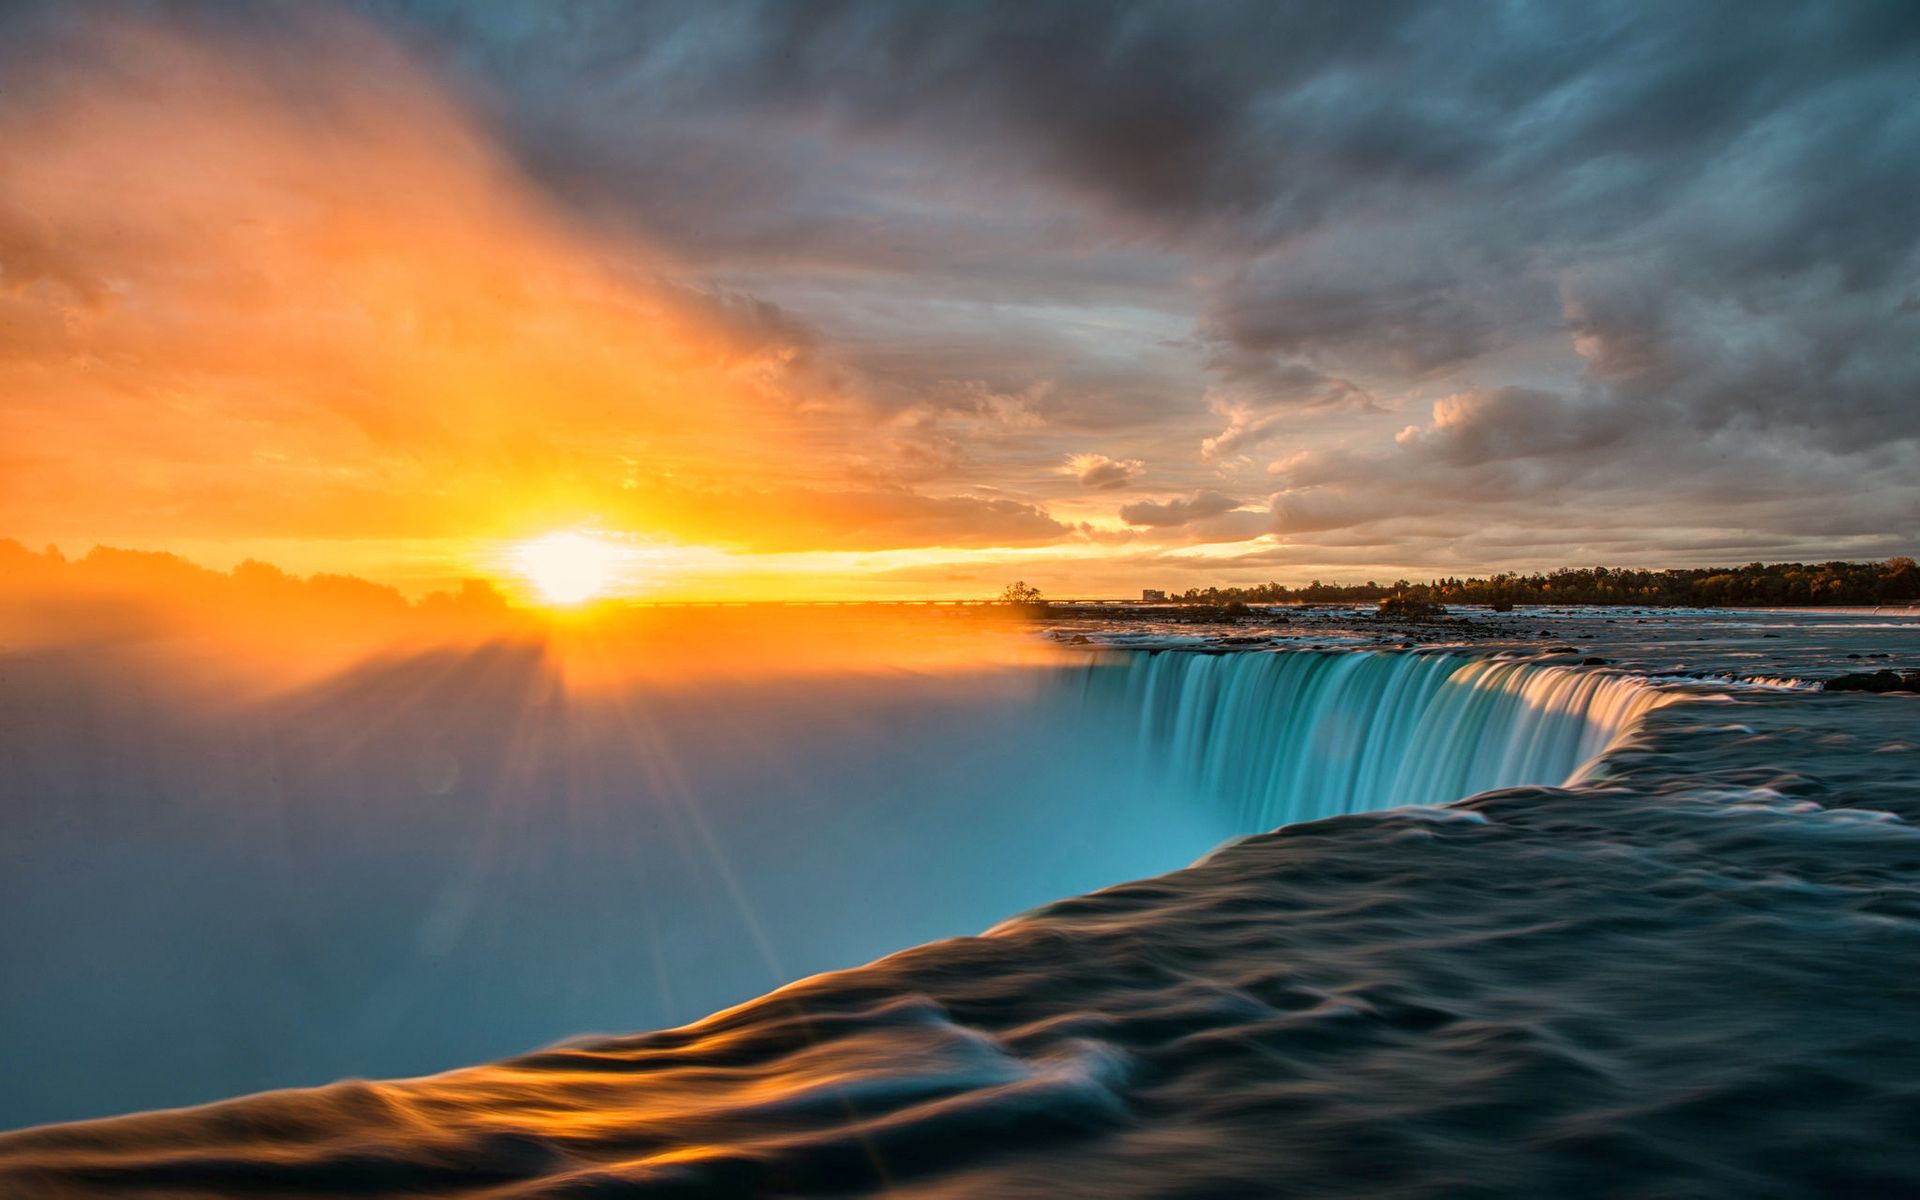 The sun rising over a waterfall with a dark sky above - Sunset